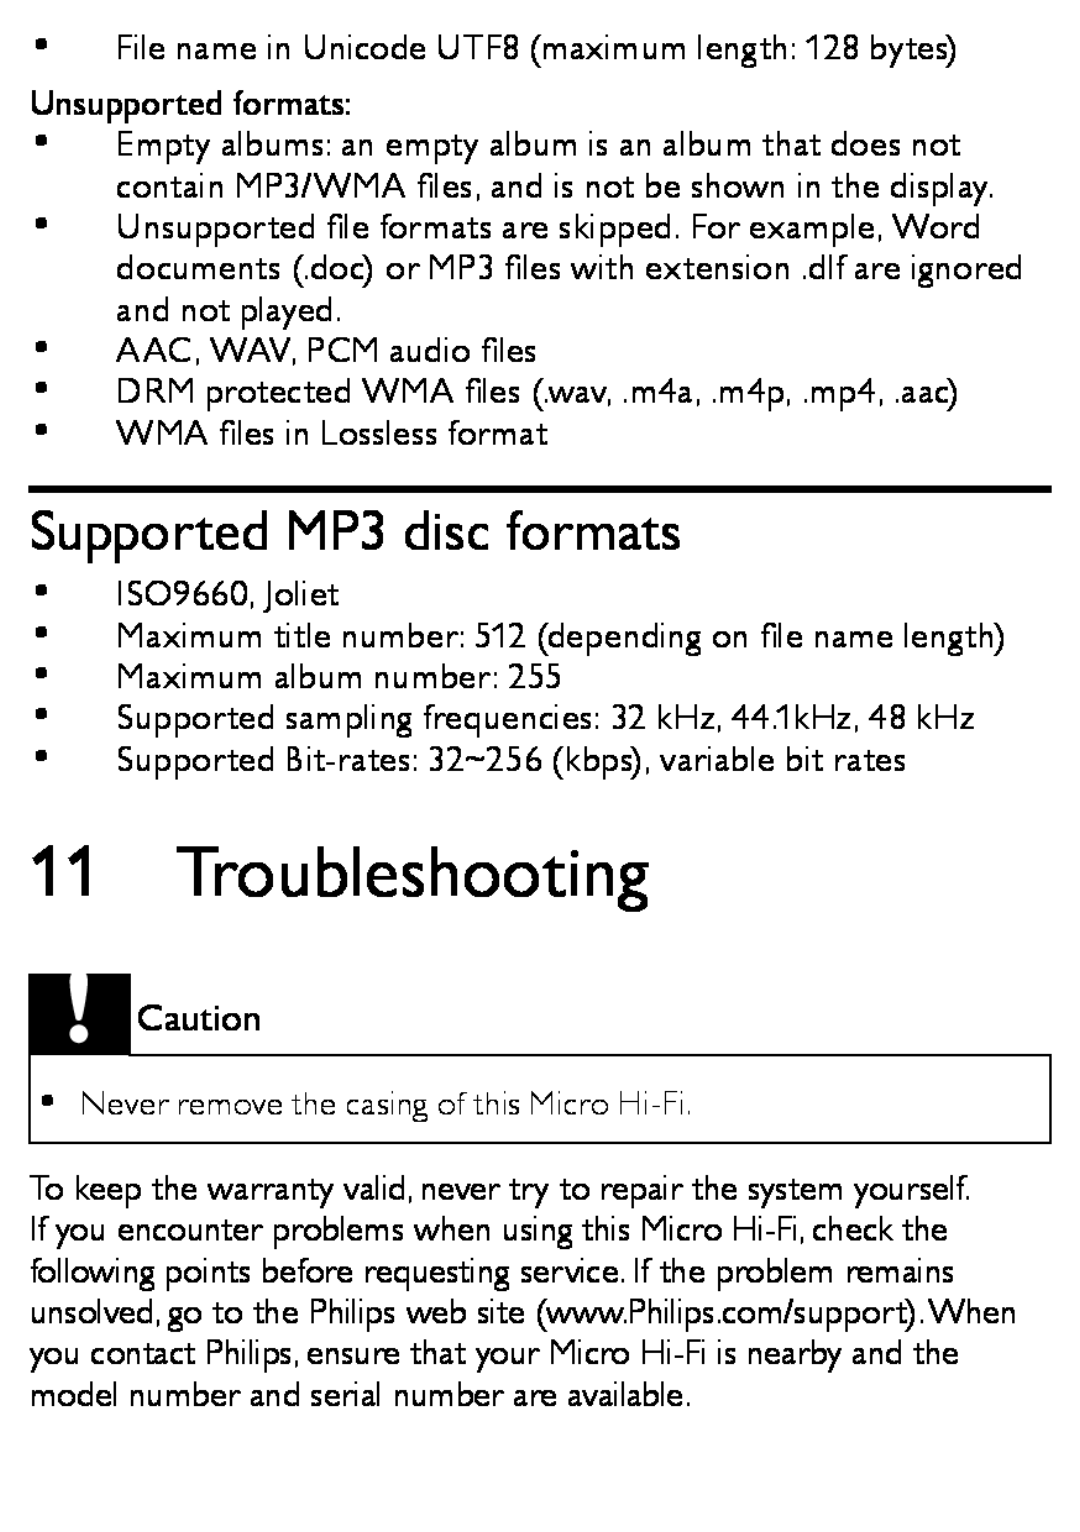 Philips MCM166/12 user manual Troubleshooting, Supported MP3 disc formats 